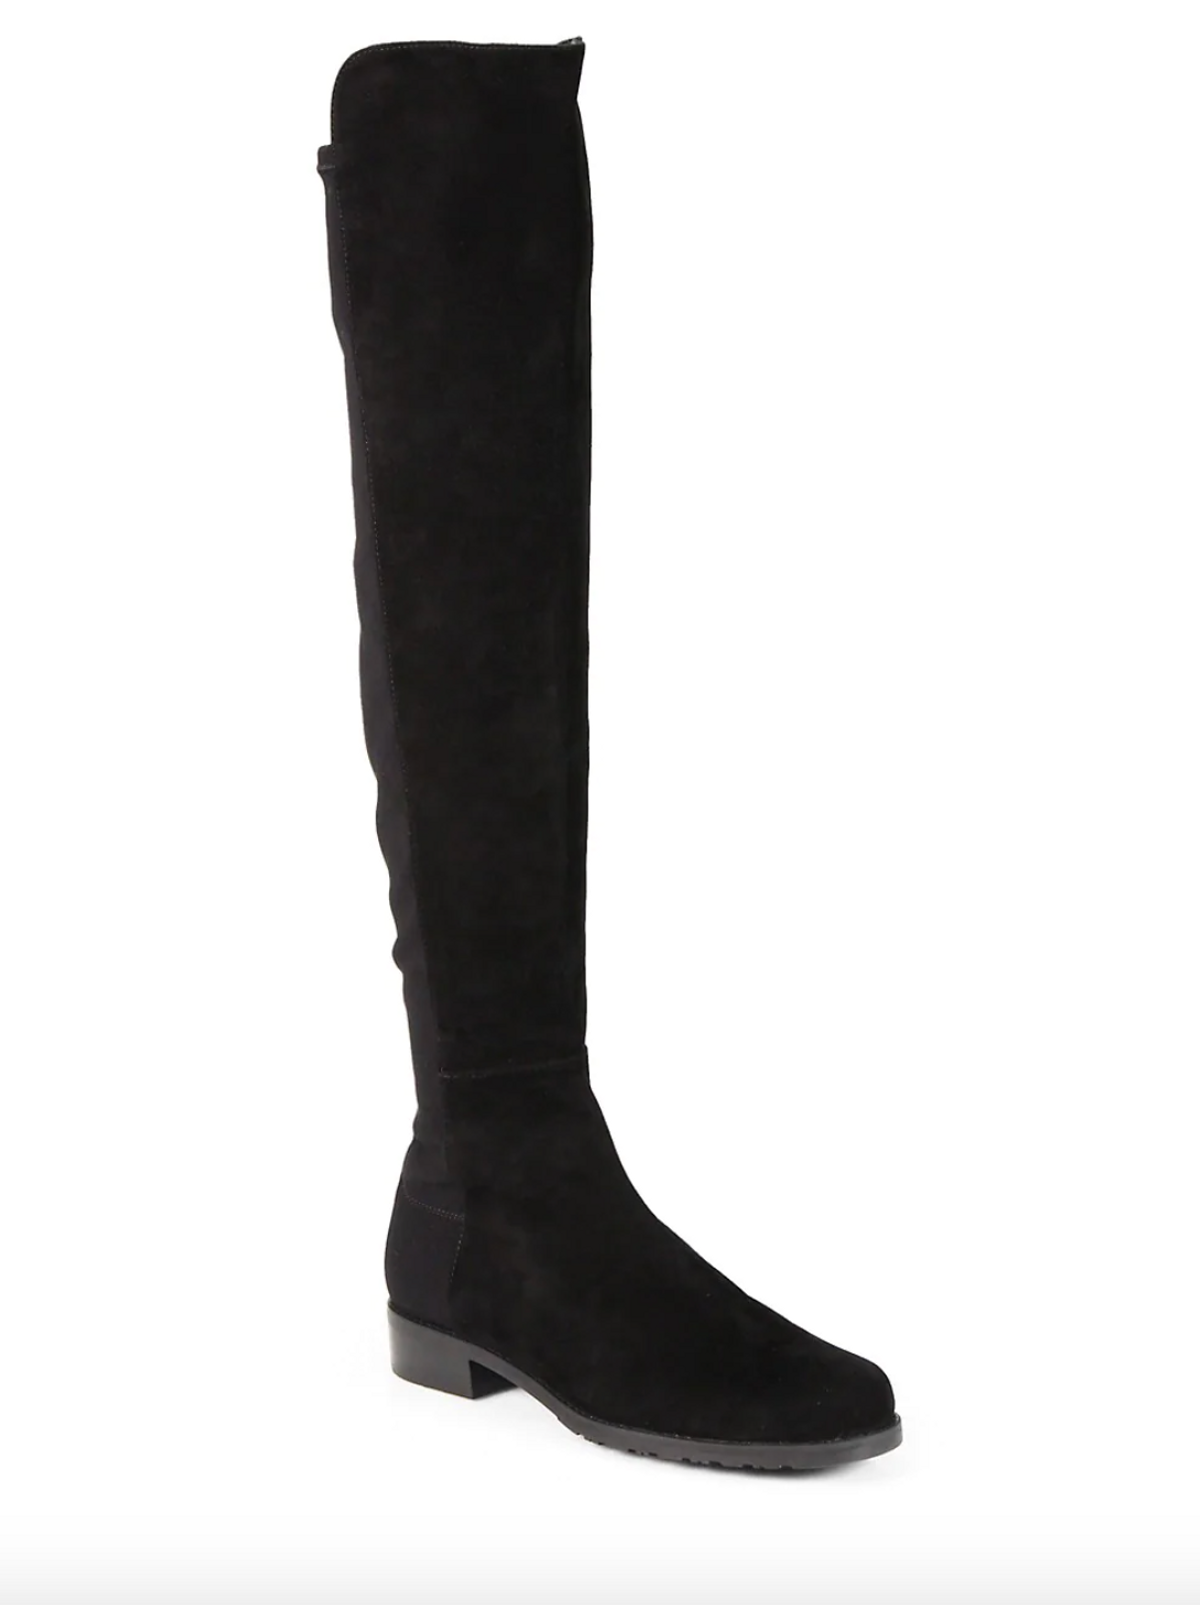 5050 Over-the-Knee Stretch Suede Boots